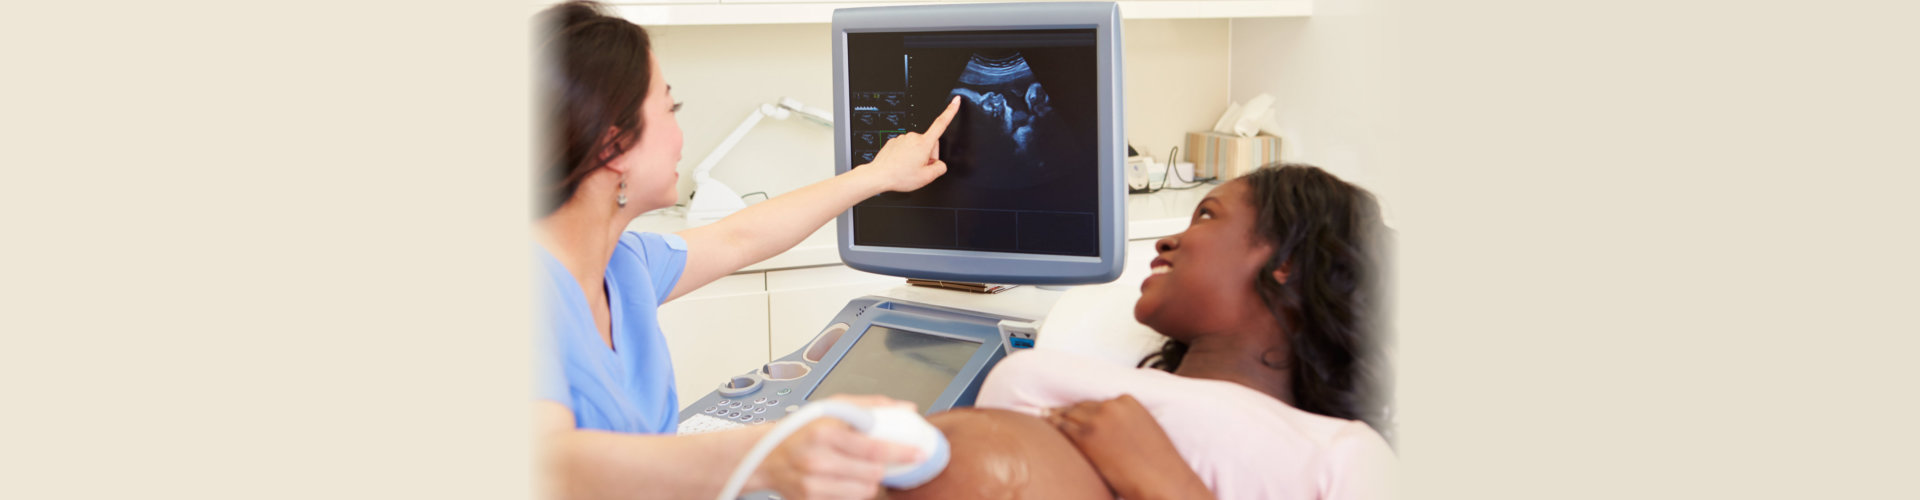 Pregnant Woman Having 4D Ultrasound Scan In Clinic With Nurse Pointing To Screen